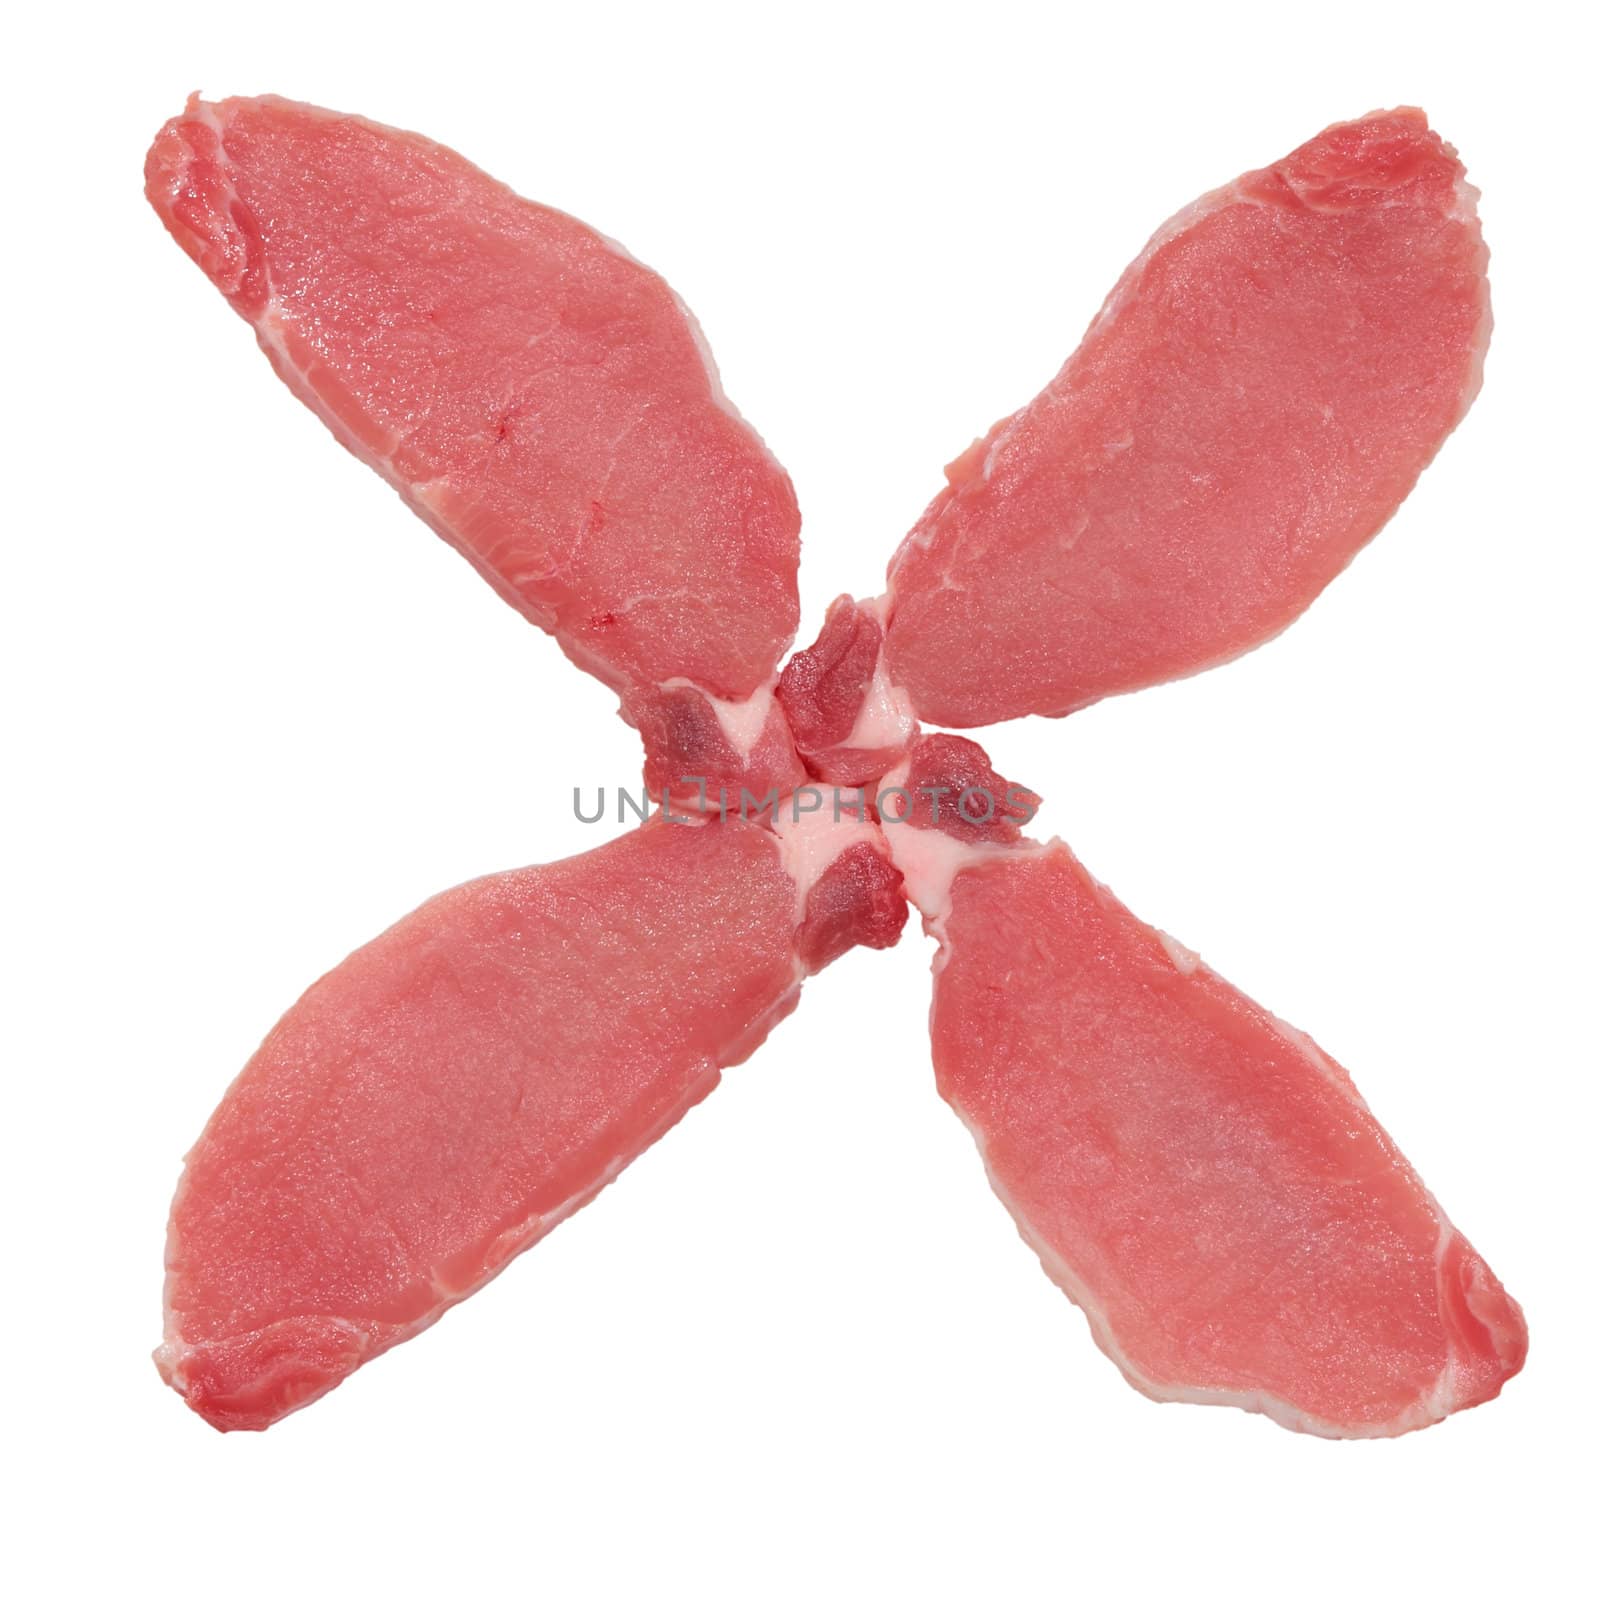 raw fillets of pork tenderloin placed in the form of a cross cut and isolated